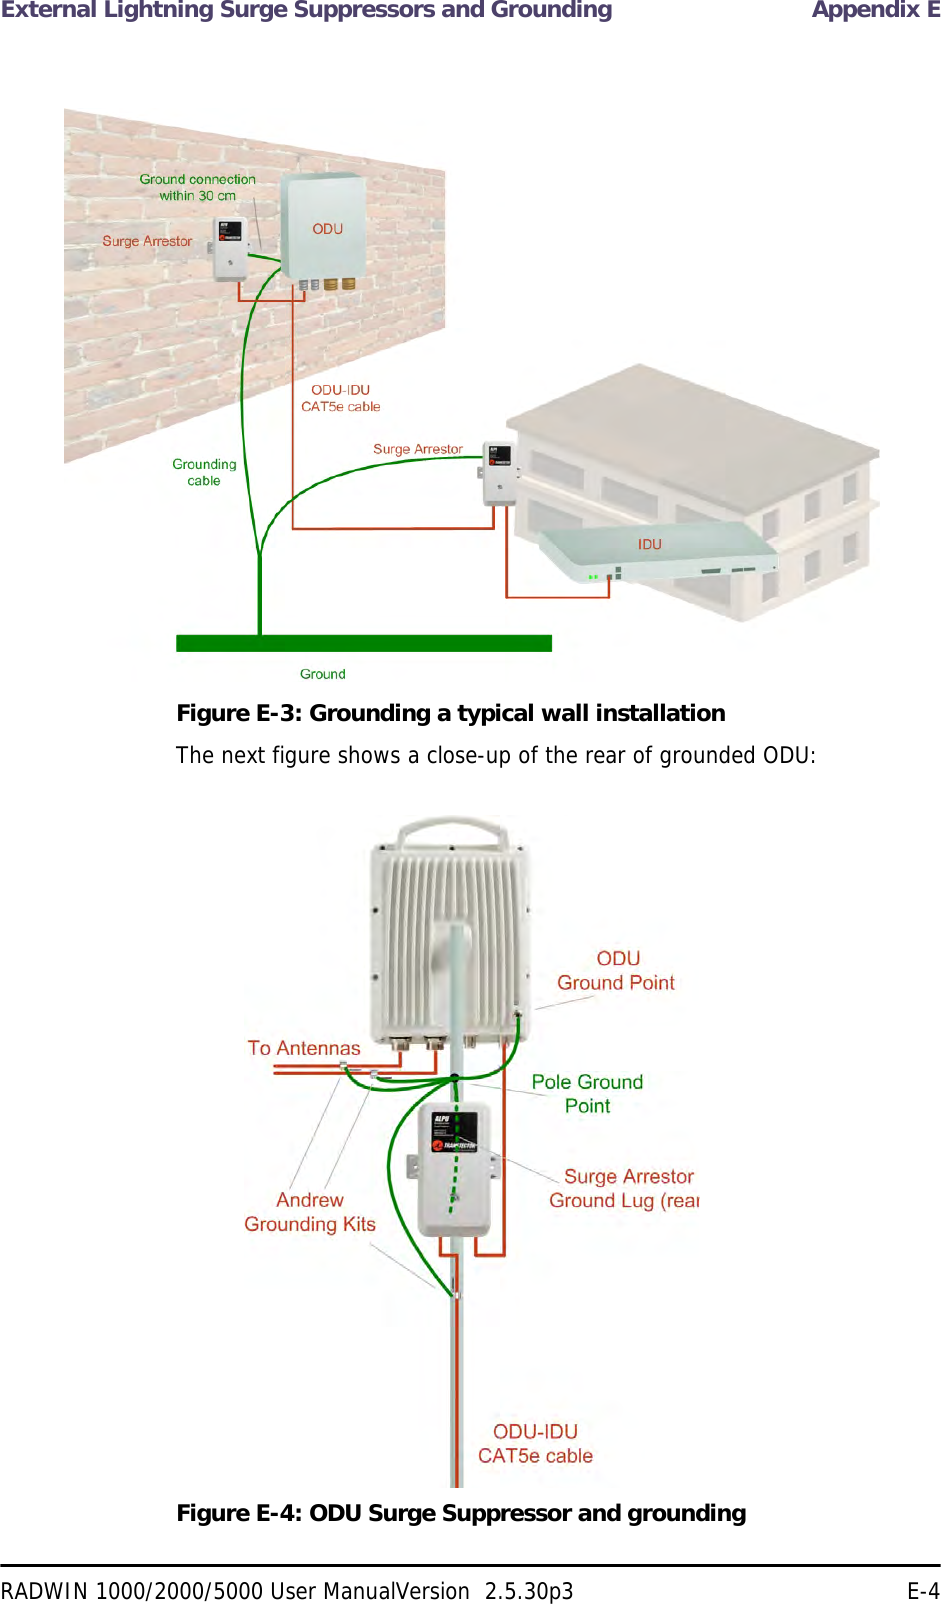 External Lightning Surge Suppressors and Grounding Appendix ERADWIN 1000/2000/5000 User ManualVersion  2.5.30p3 E-4Figure E-3: Grounding a typical wall installationThe next figure shows a close-up of the rear of grounded ODU:Figure E-4: ODU Surge Suppressor and grounding